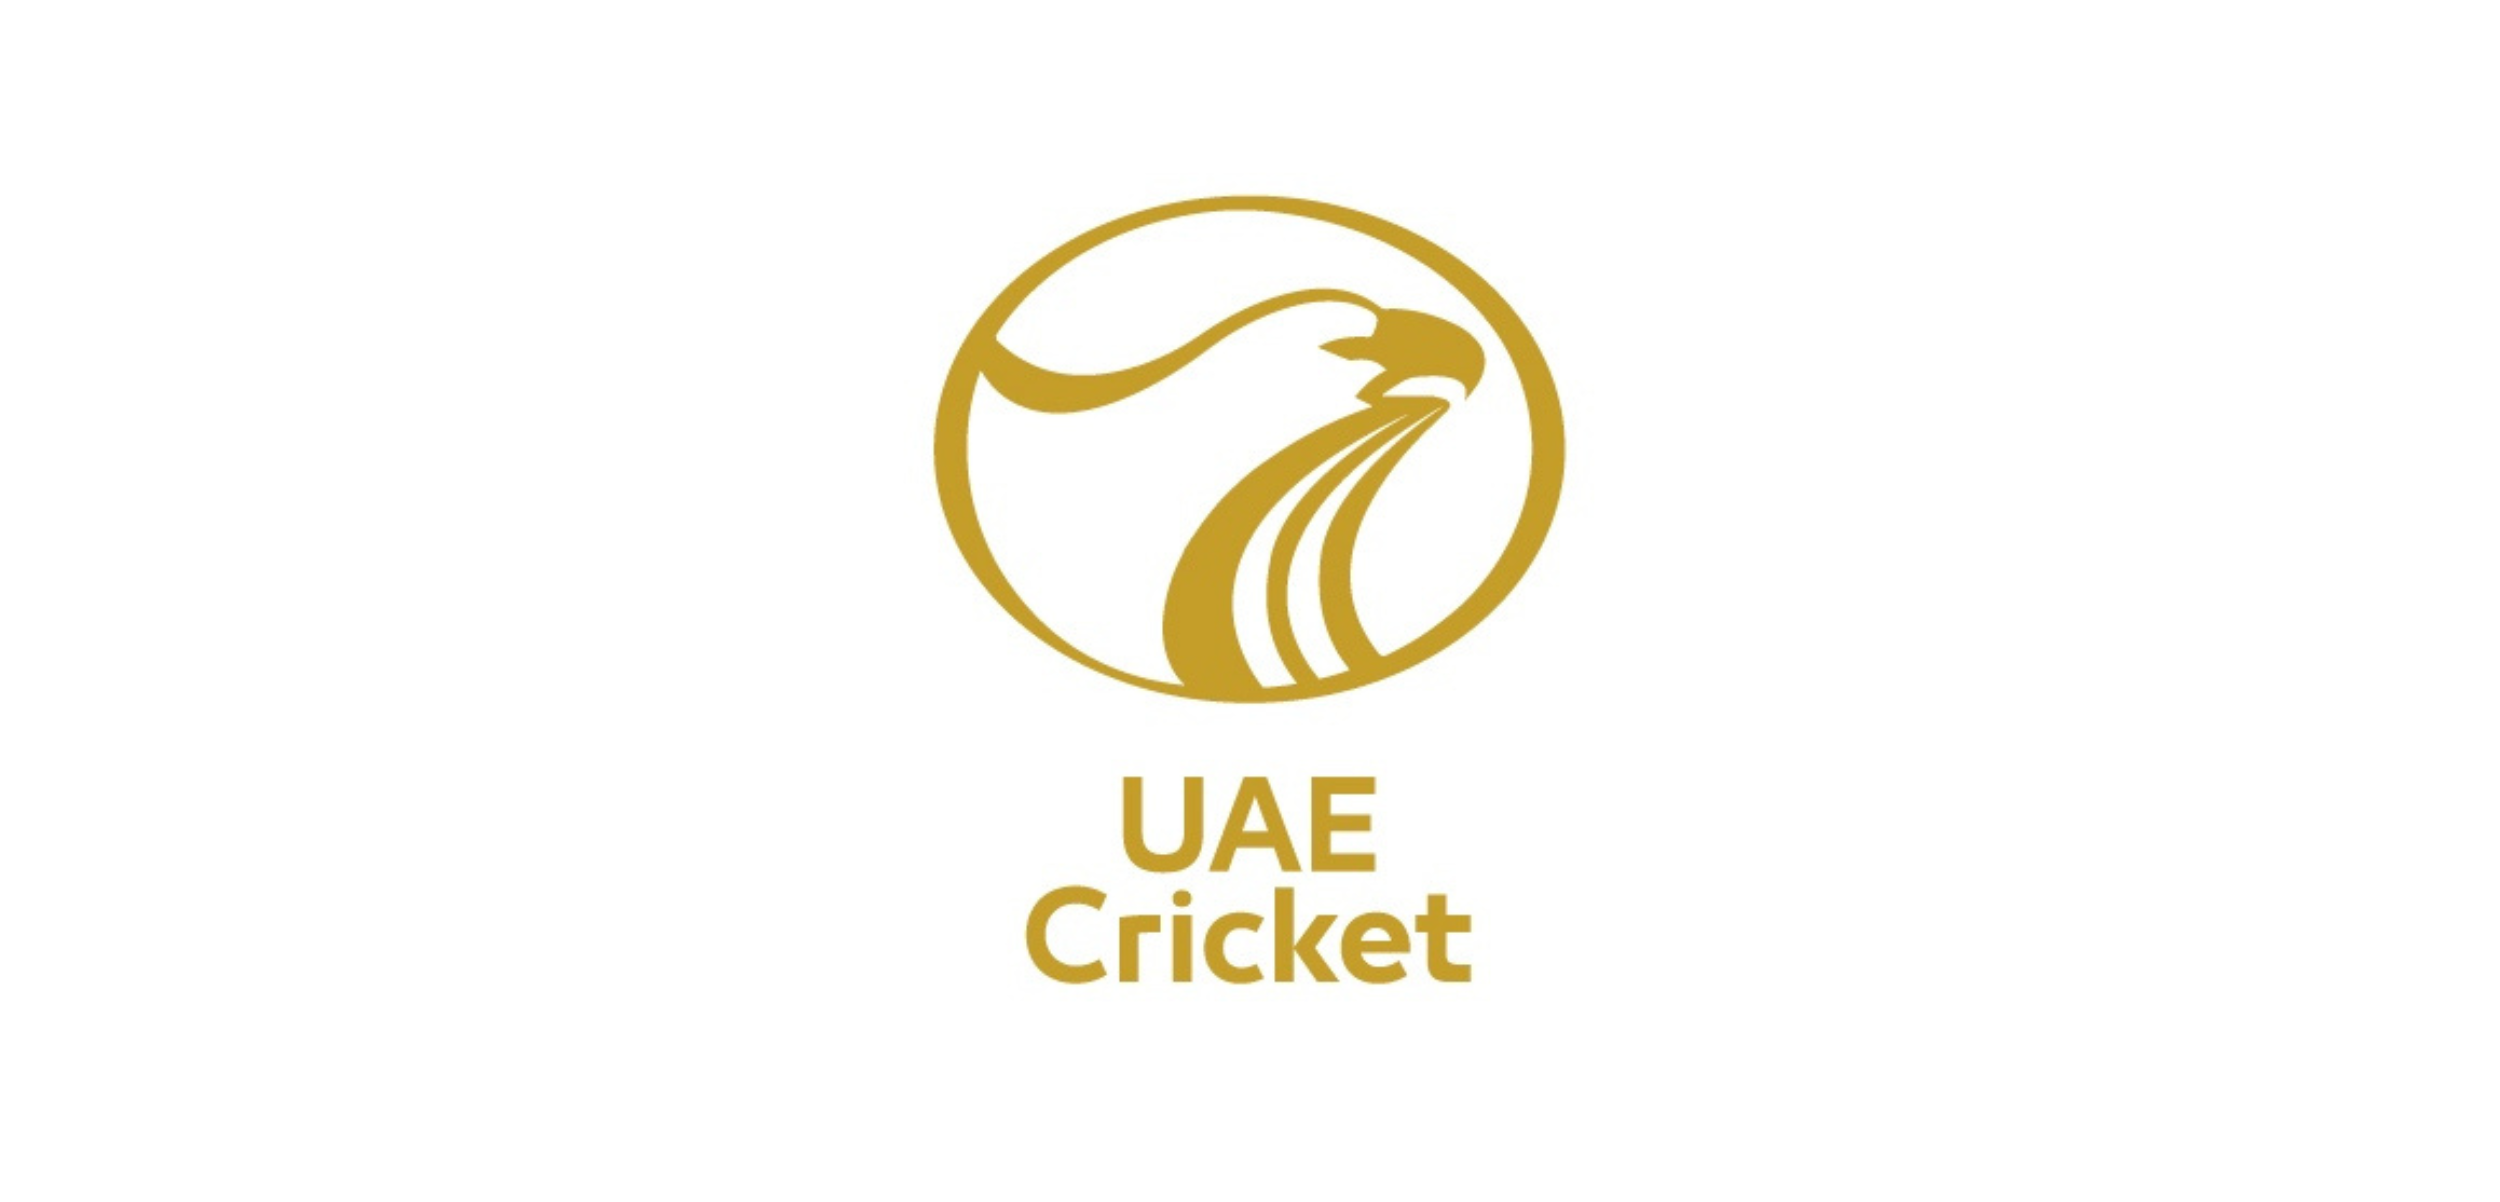 Emirates Cricket’s domestic ‘Emirates D20 powered by FanCode’ 20-over tournament set for action from Monday December 12